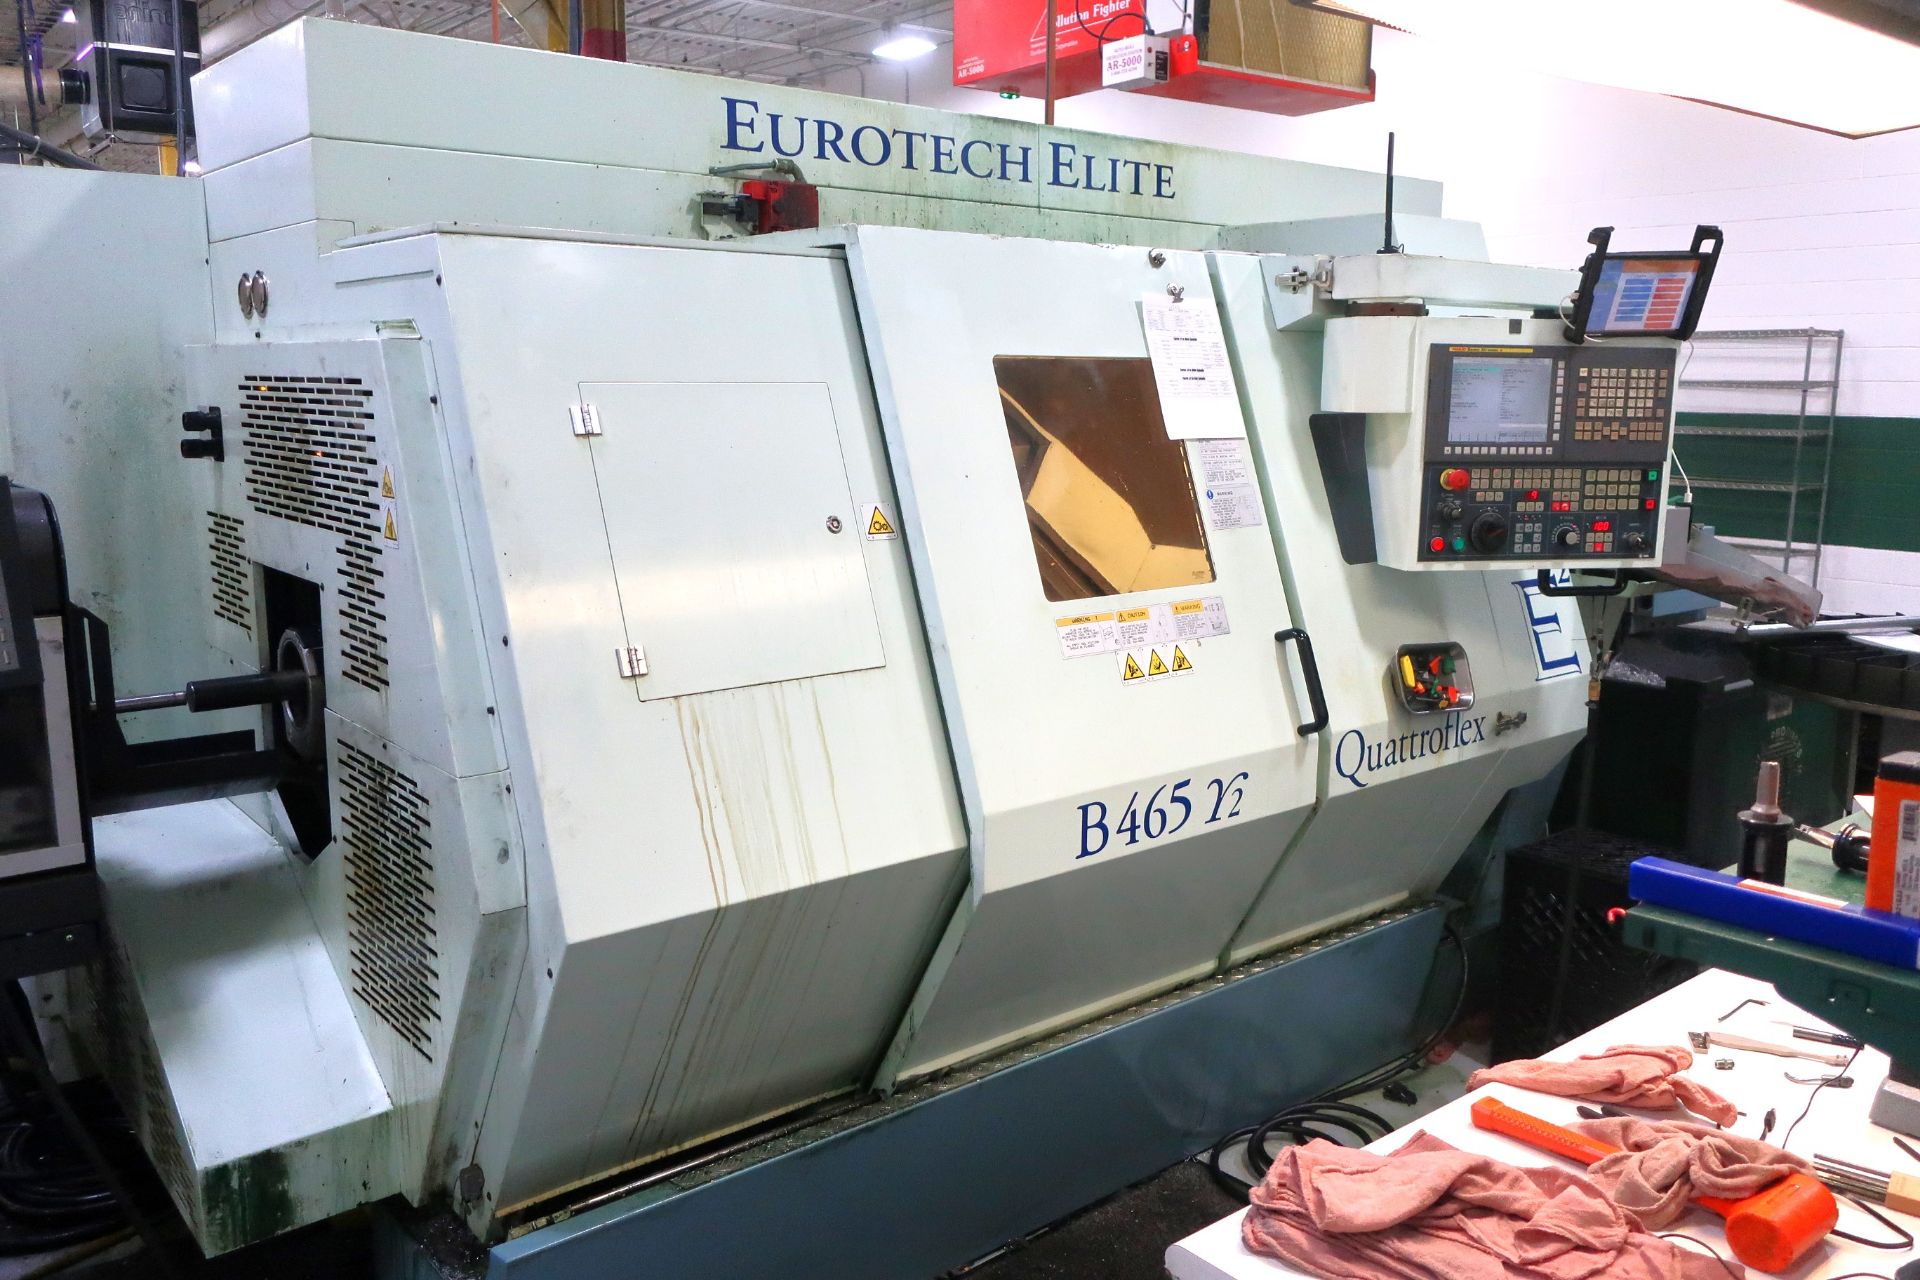 EUROTECH B465 Y2 QUATROFLEX TWIN SPINDLE TWIN TURRET CNC LATHE W/DUAL Y-AXIS, NEW 2011, SN 11045 - Image 9 of 19